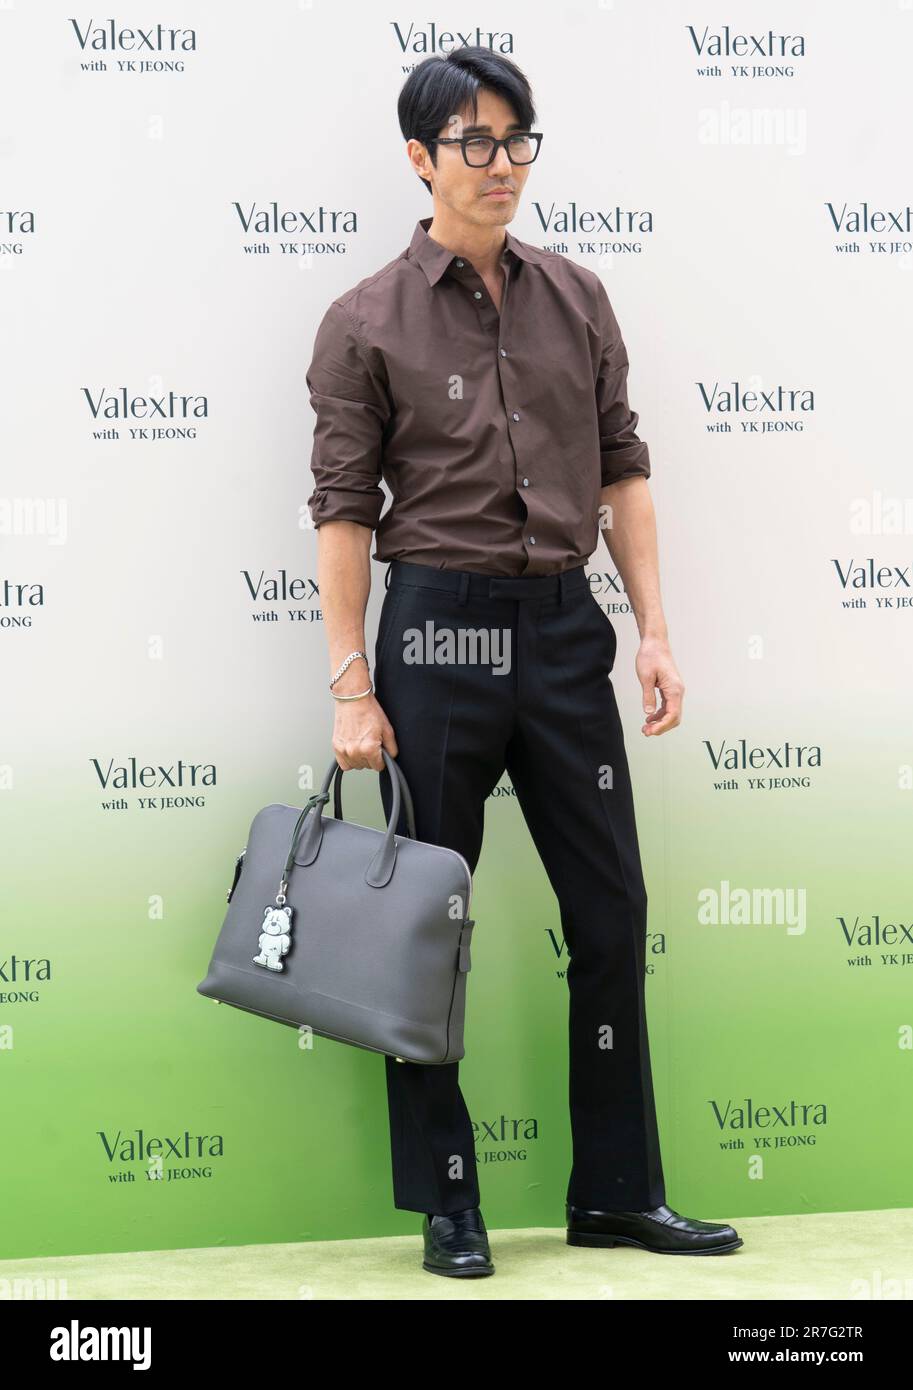 15 June 2023 – Seoul, South Korea: South Korean actor Cha Seung-won, attends a photocall for the ‘Valextra’ with YK Jeong event in Seoul, South Korea on June 15, 2023. (Photo by: Lee Young-ho/Sipa USA) Stock Photo